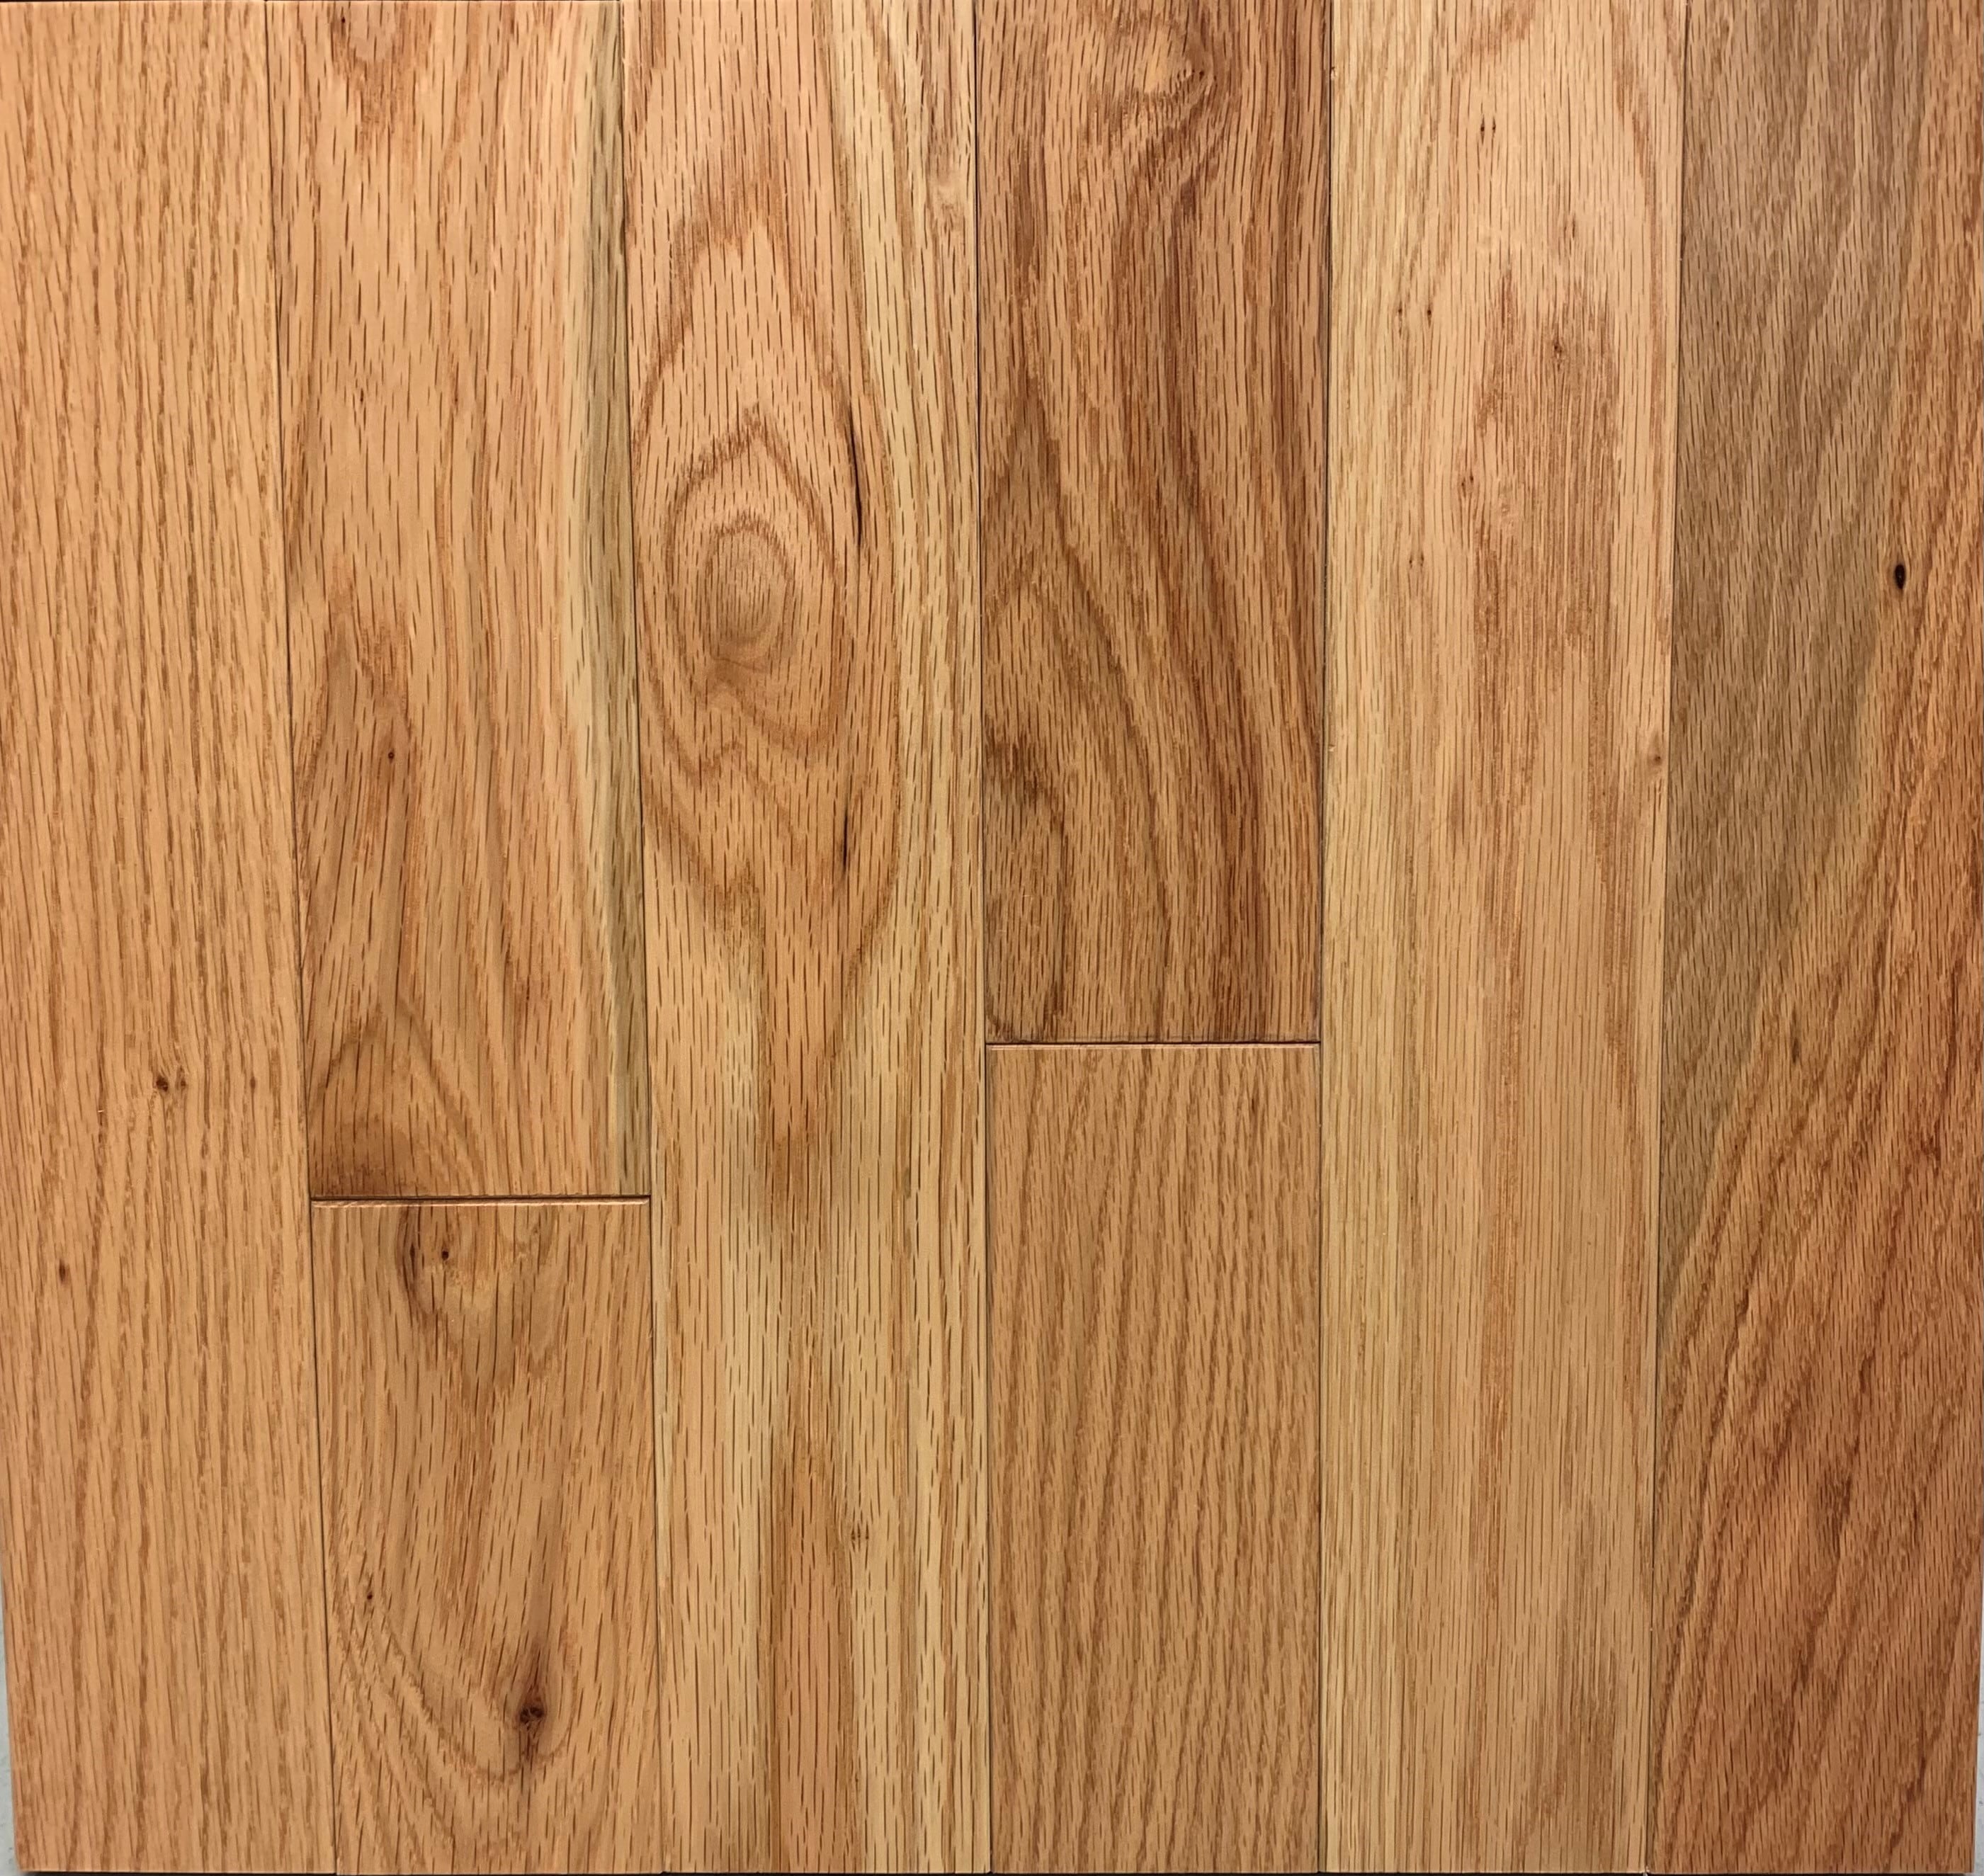 Natural Oak 2-1/4-in W x 3/4-in T x Varying Length Smooth/Traditional Solid Hardwood Flooring (25-sq ft) in Brown | - allen + roth 2RO700